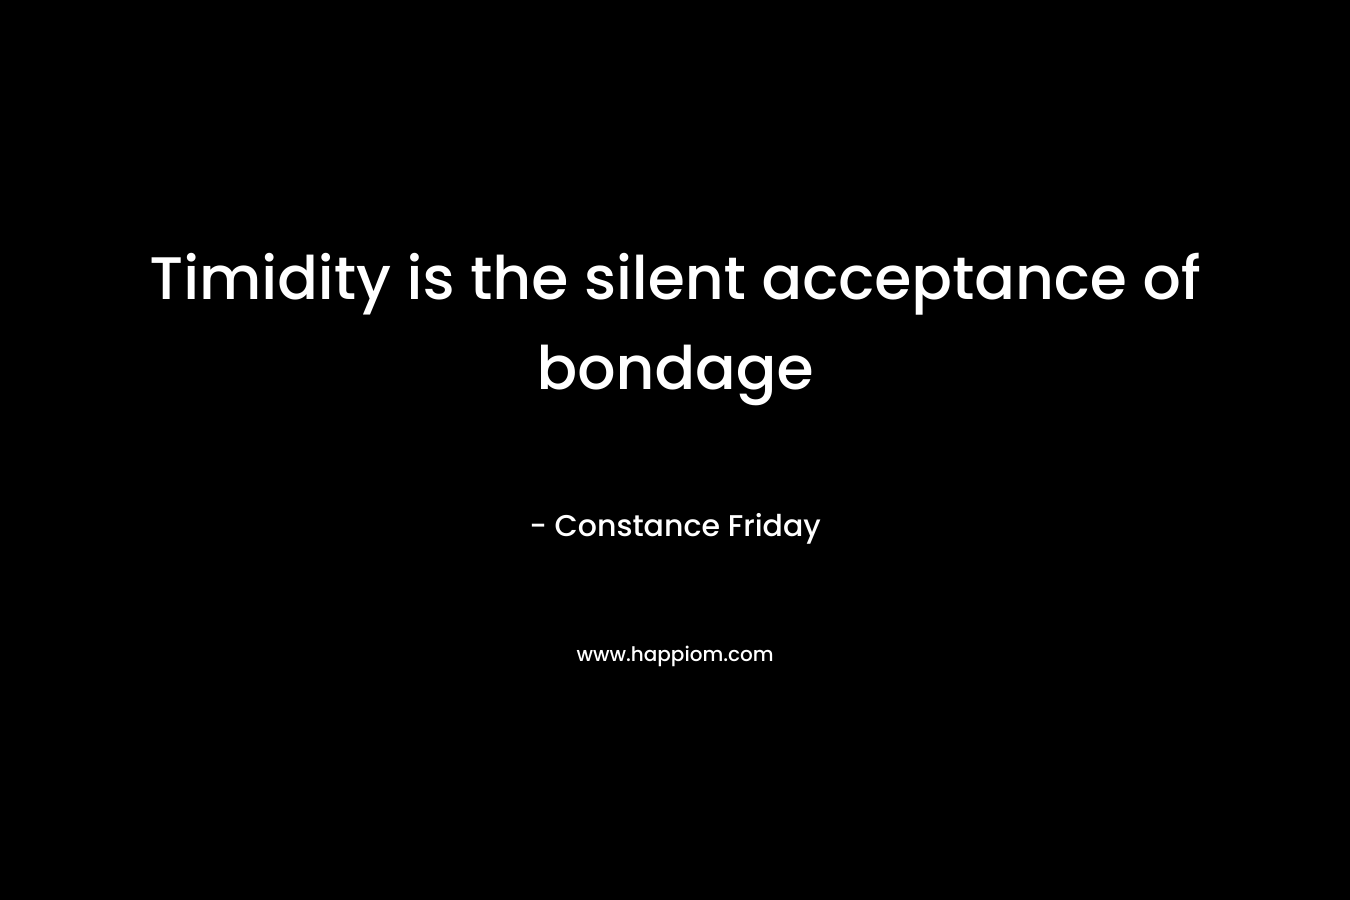 Timidity is the silent acceptance of bondage – Constance Friday